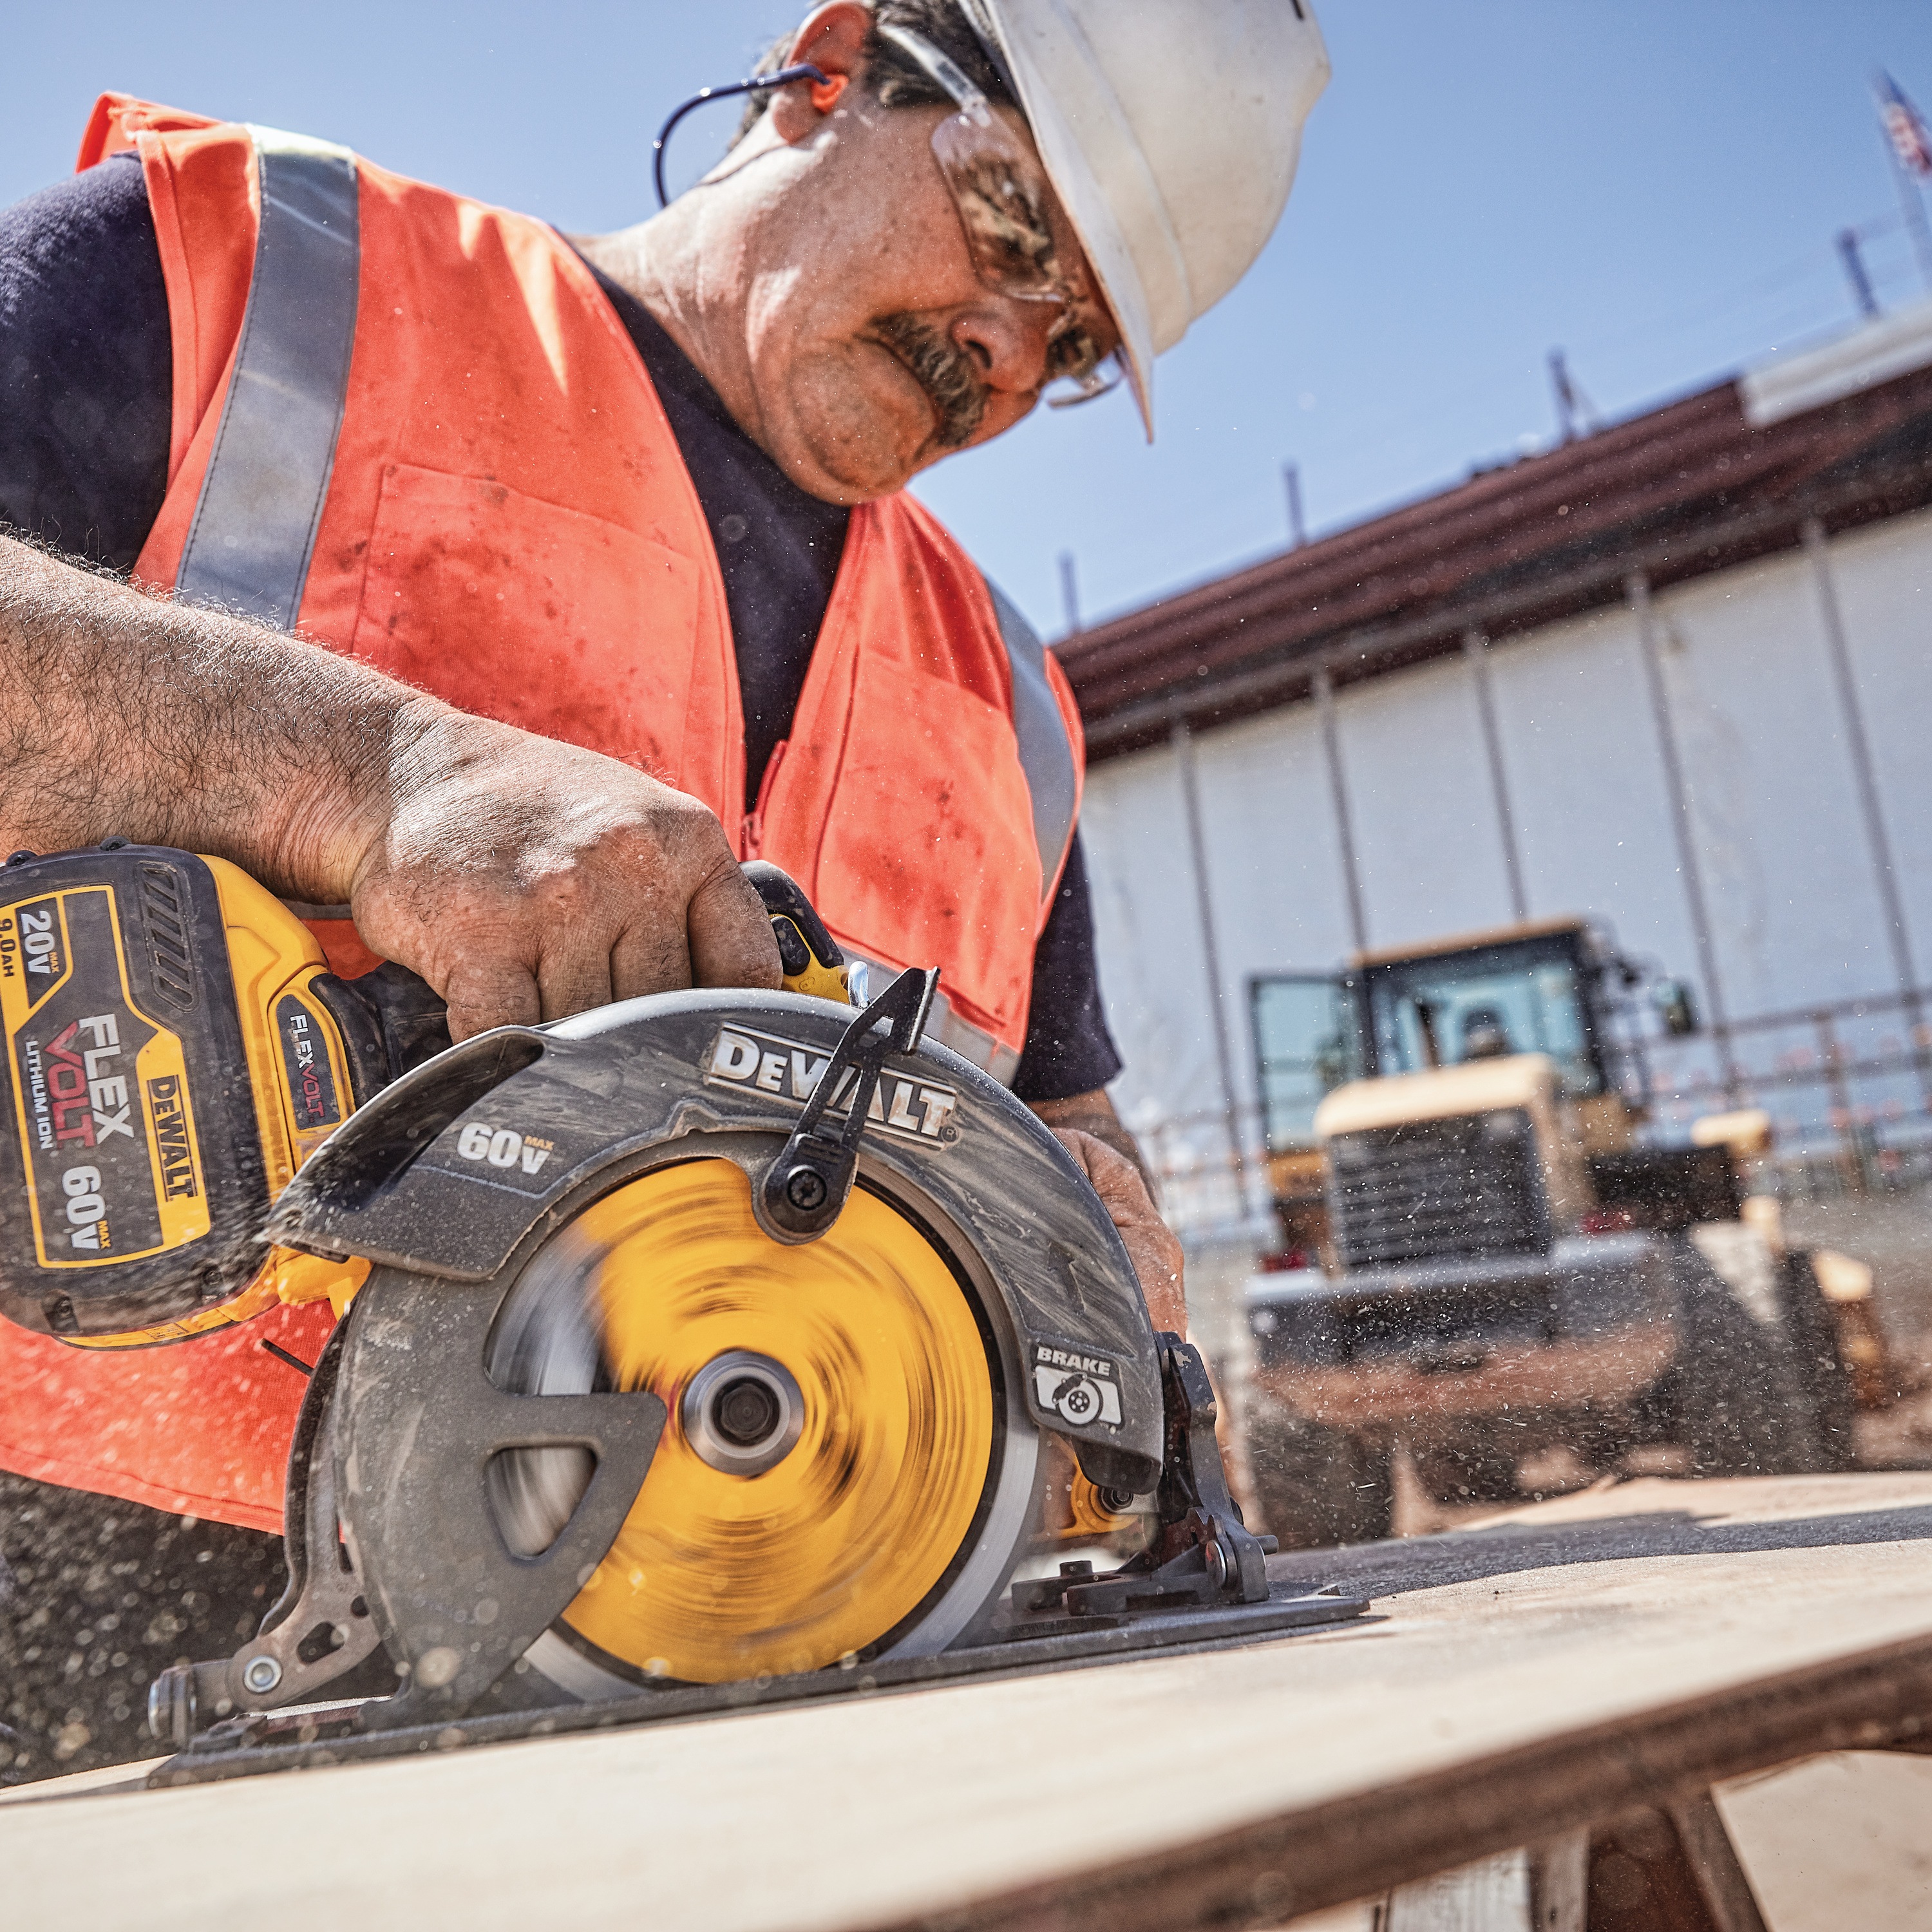 20 Volt to 60 Volt 9 AMP hours Lithium-Ion Battery-powered Circular Saw being used by a construction worker to cut a wooden sheet at a construction site